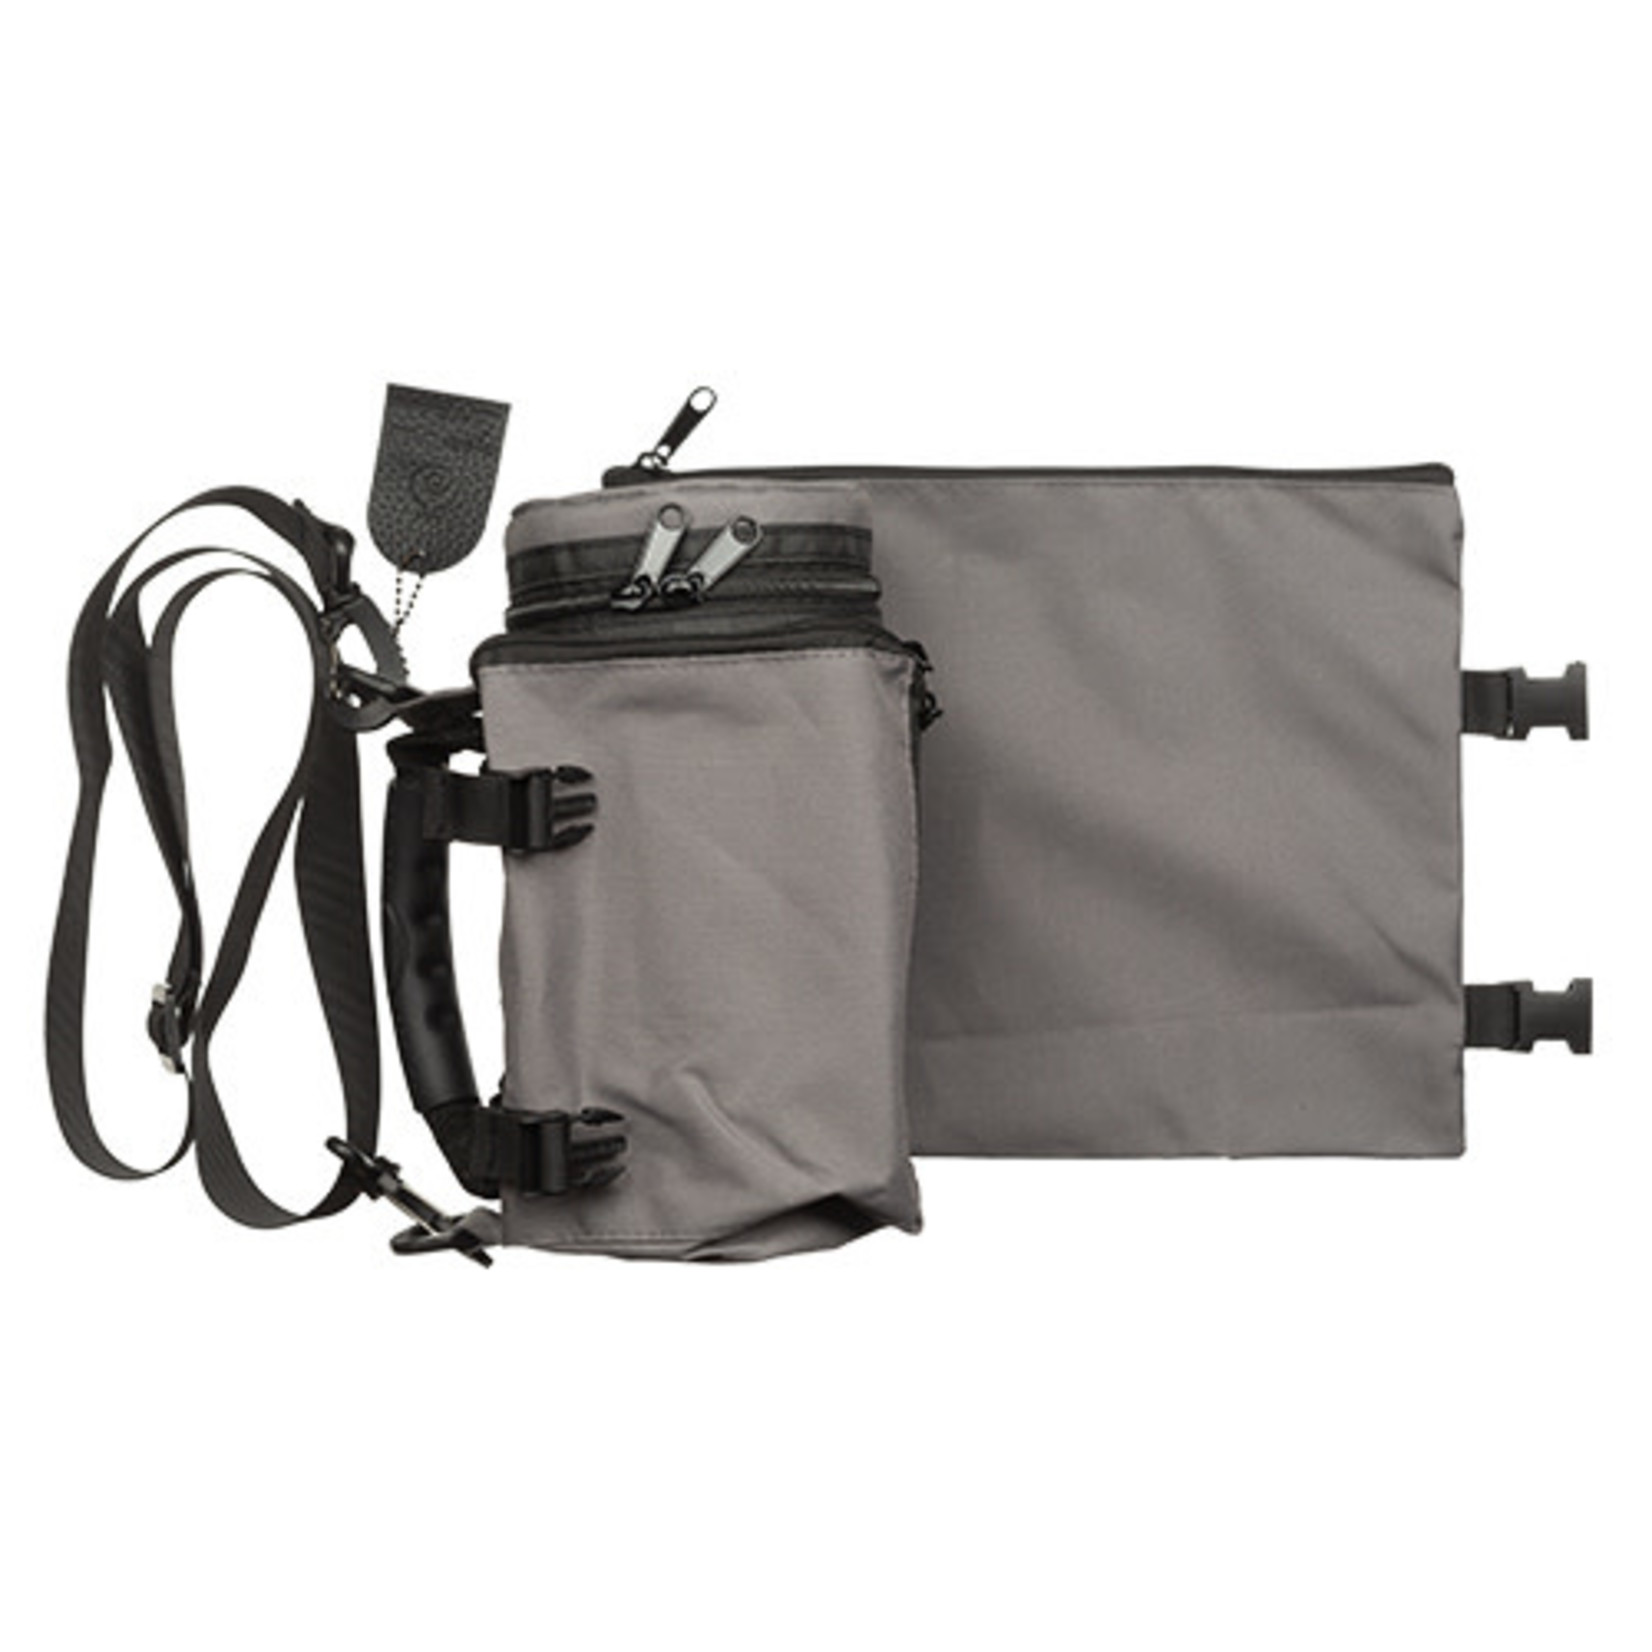 Thermal Tallit and Tefillin Container Set, Dark Grey